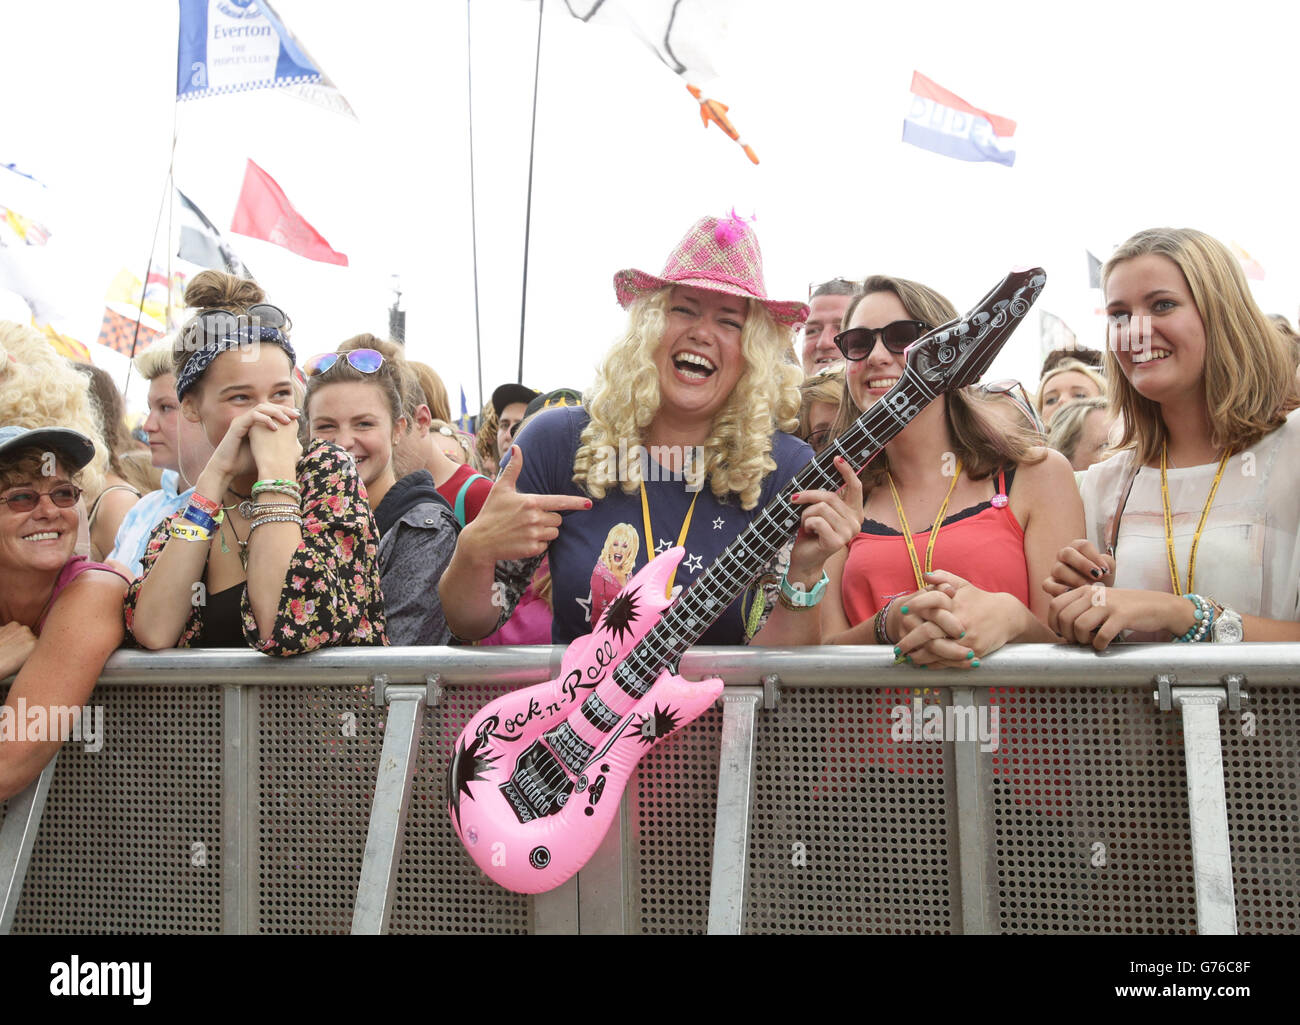 Glastonbury Festival 2014 - Day 3. Fans watch Dolly Parton performing at the Glastonbury Festival, at Worthy Farm in Somerset. Stock Photo